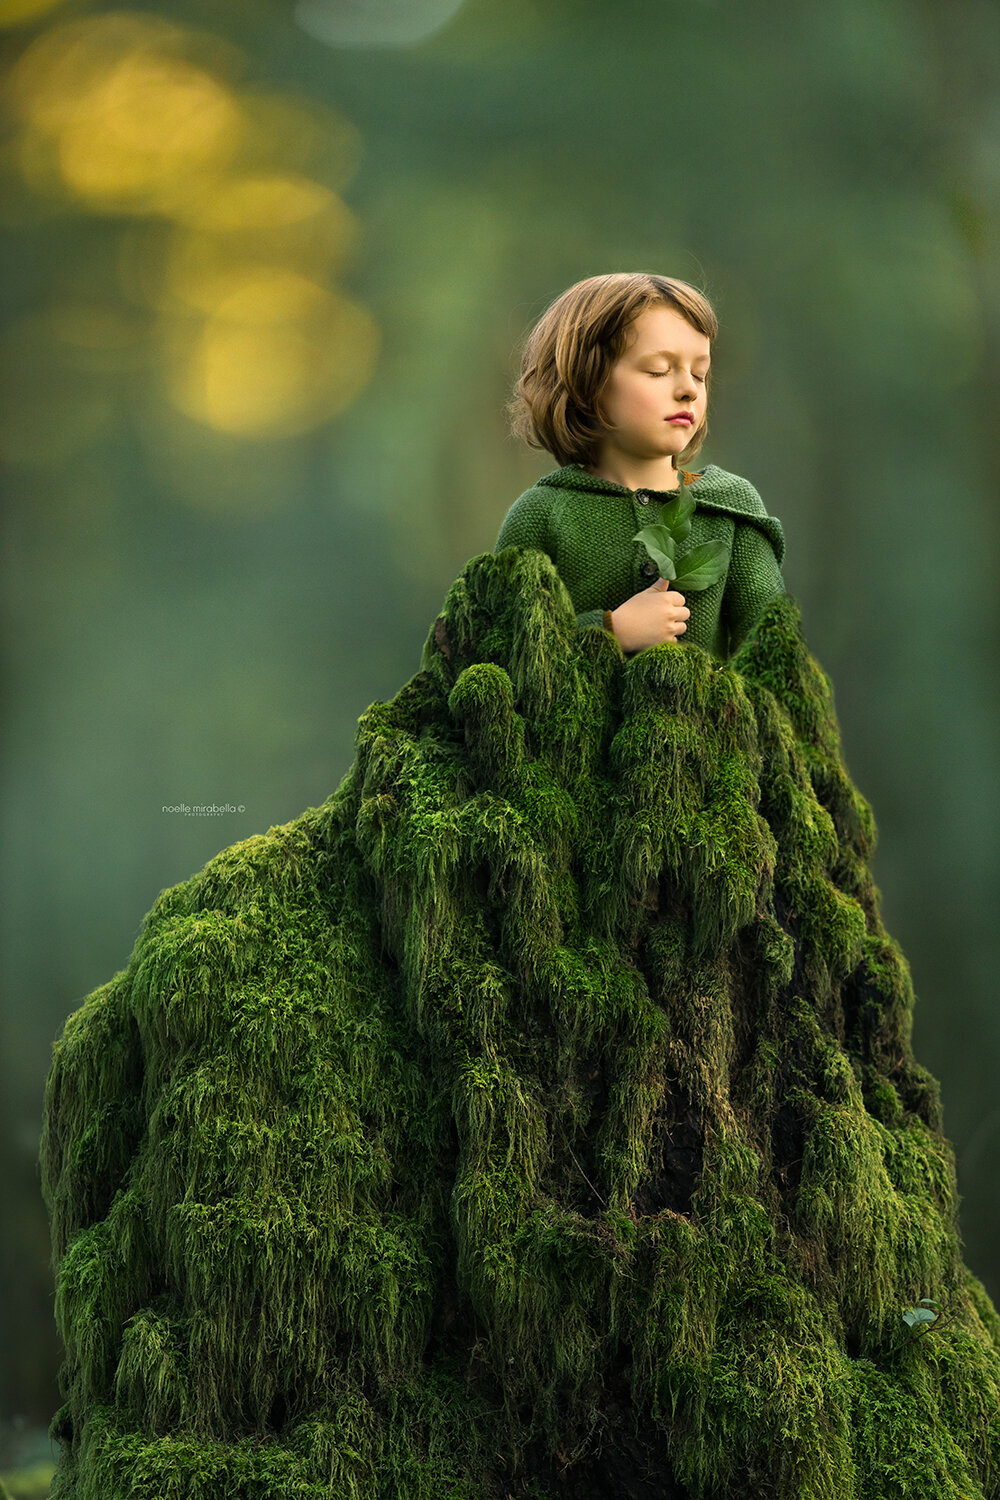 Boy dressed in green standing on a mossy stump.